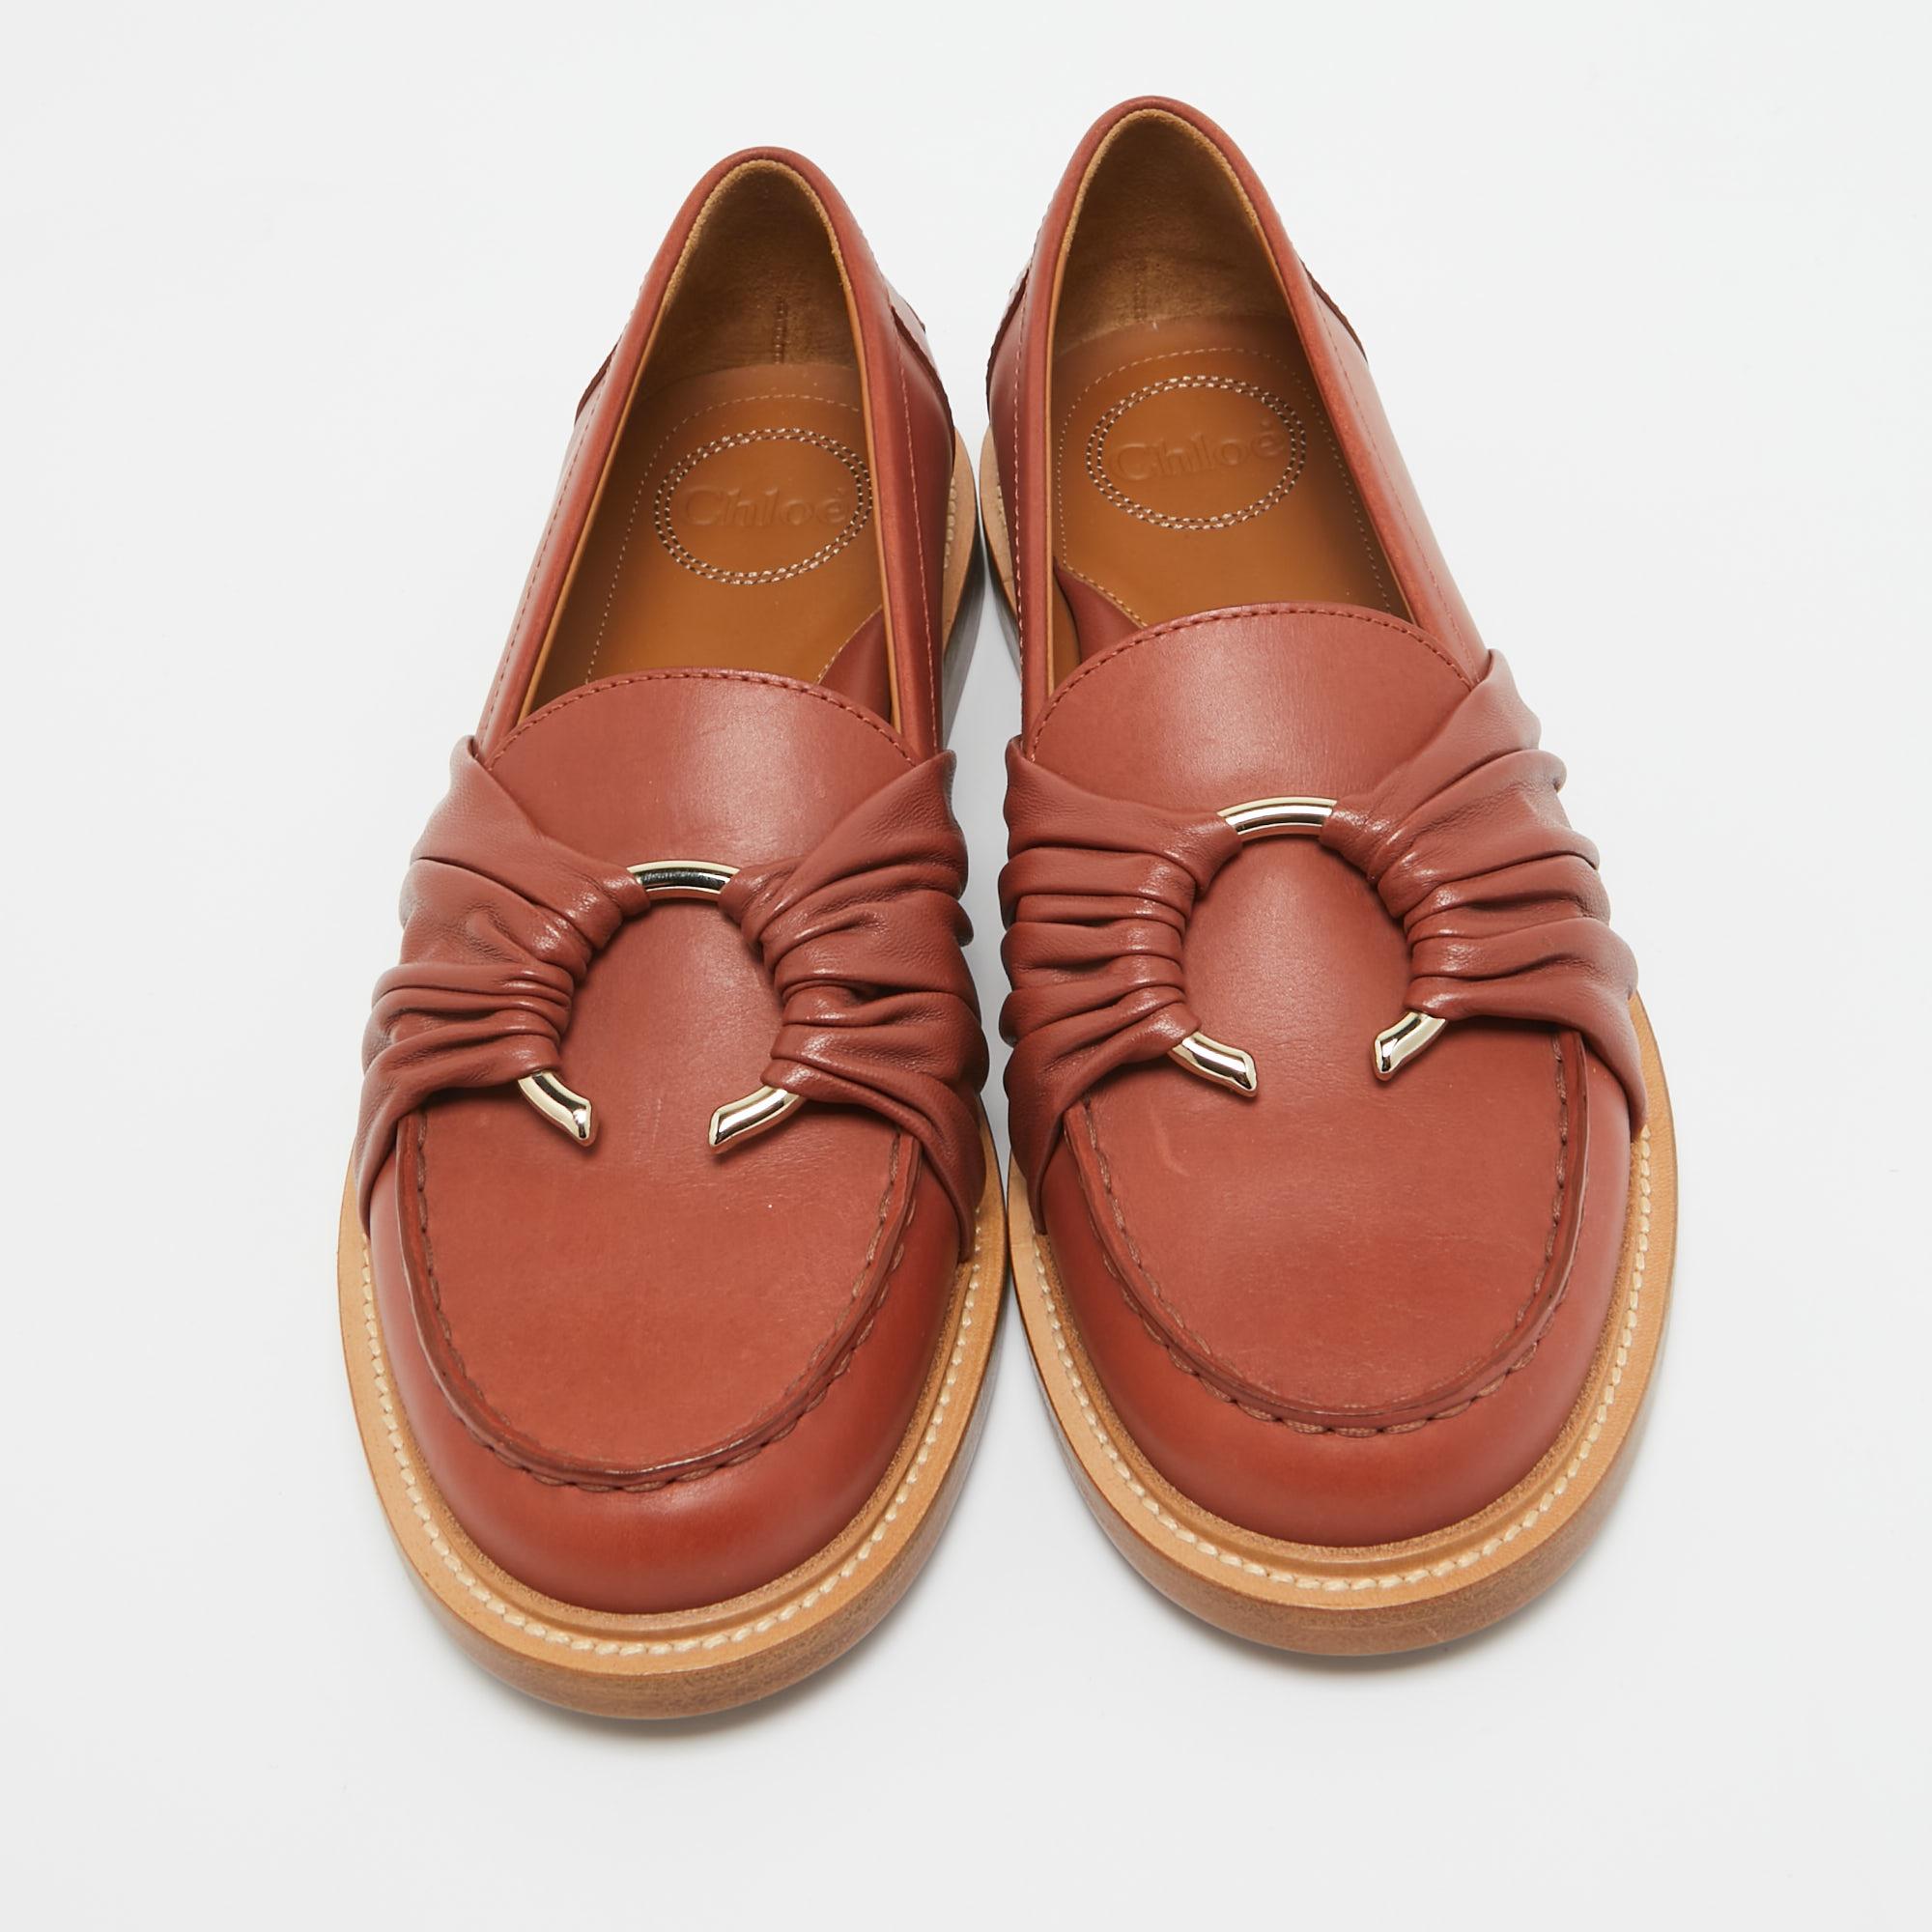 Chloe Brown Leather C Logo Loafers Size 38 1